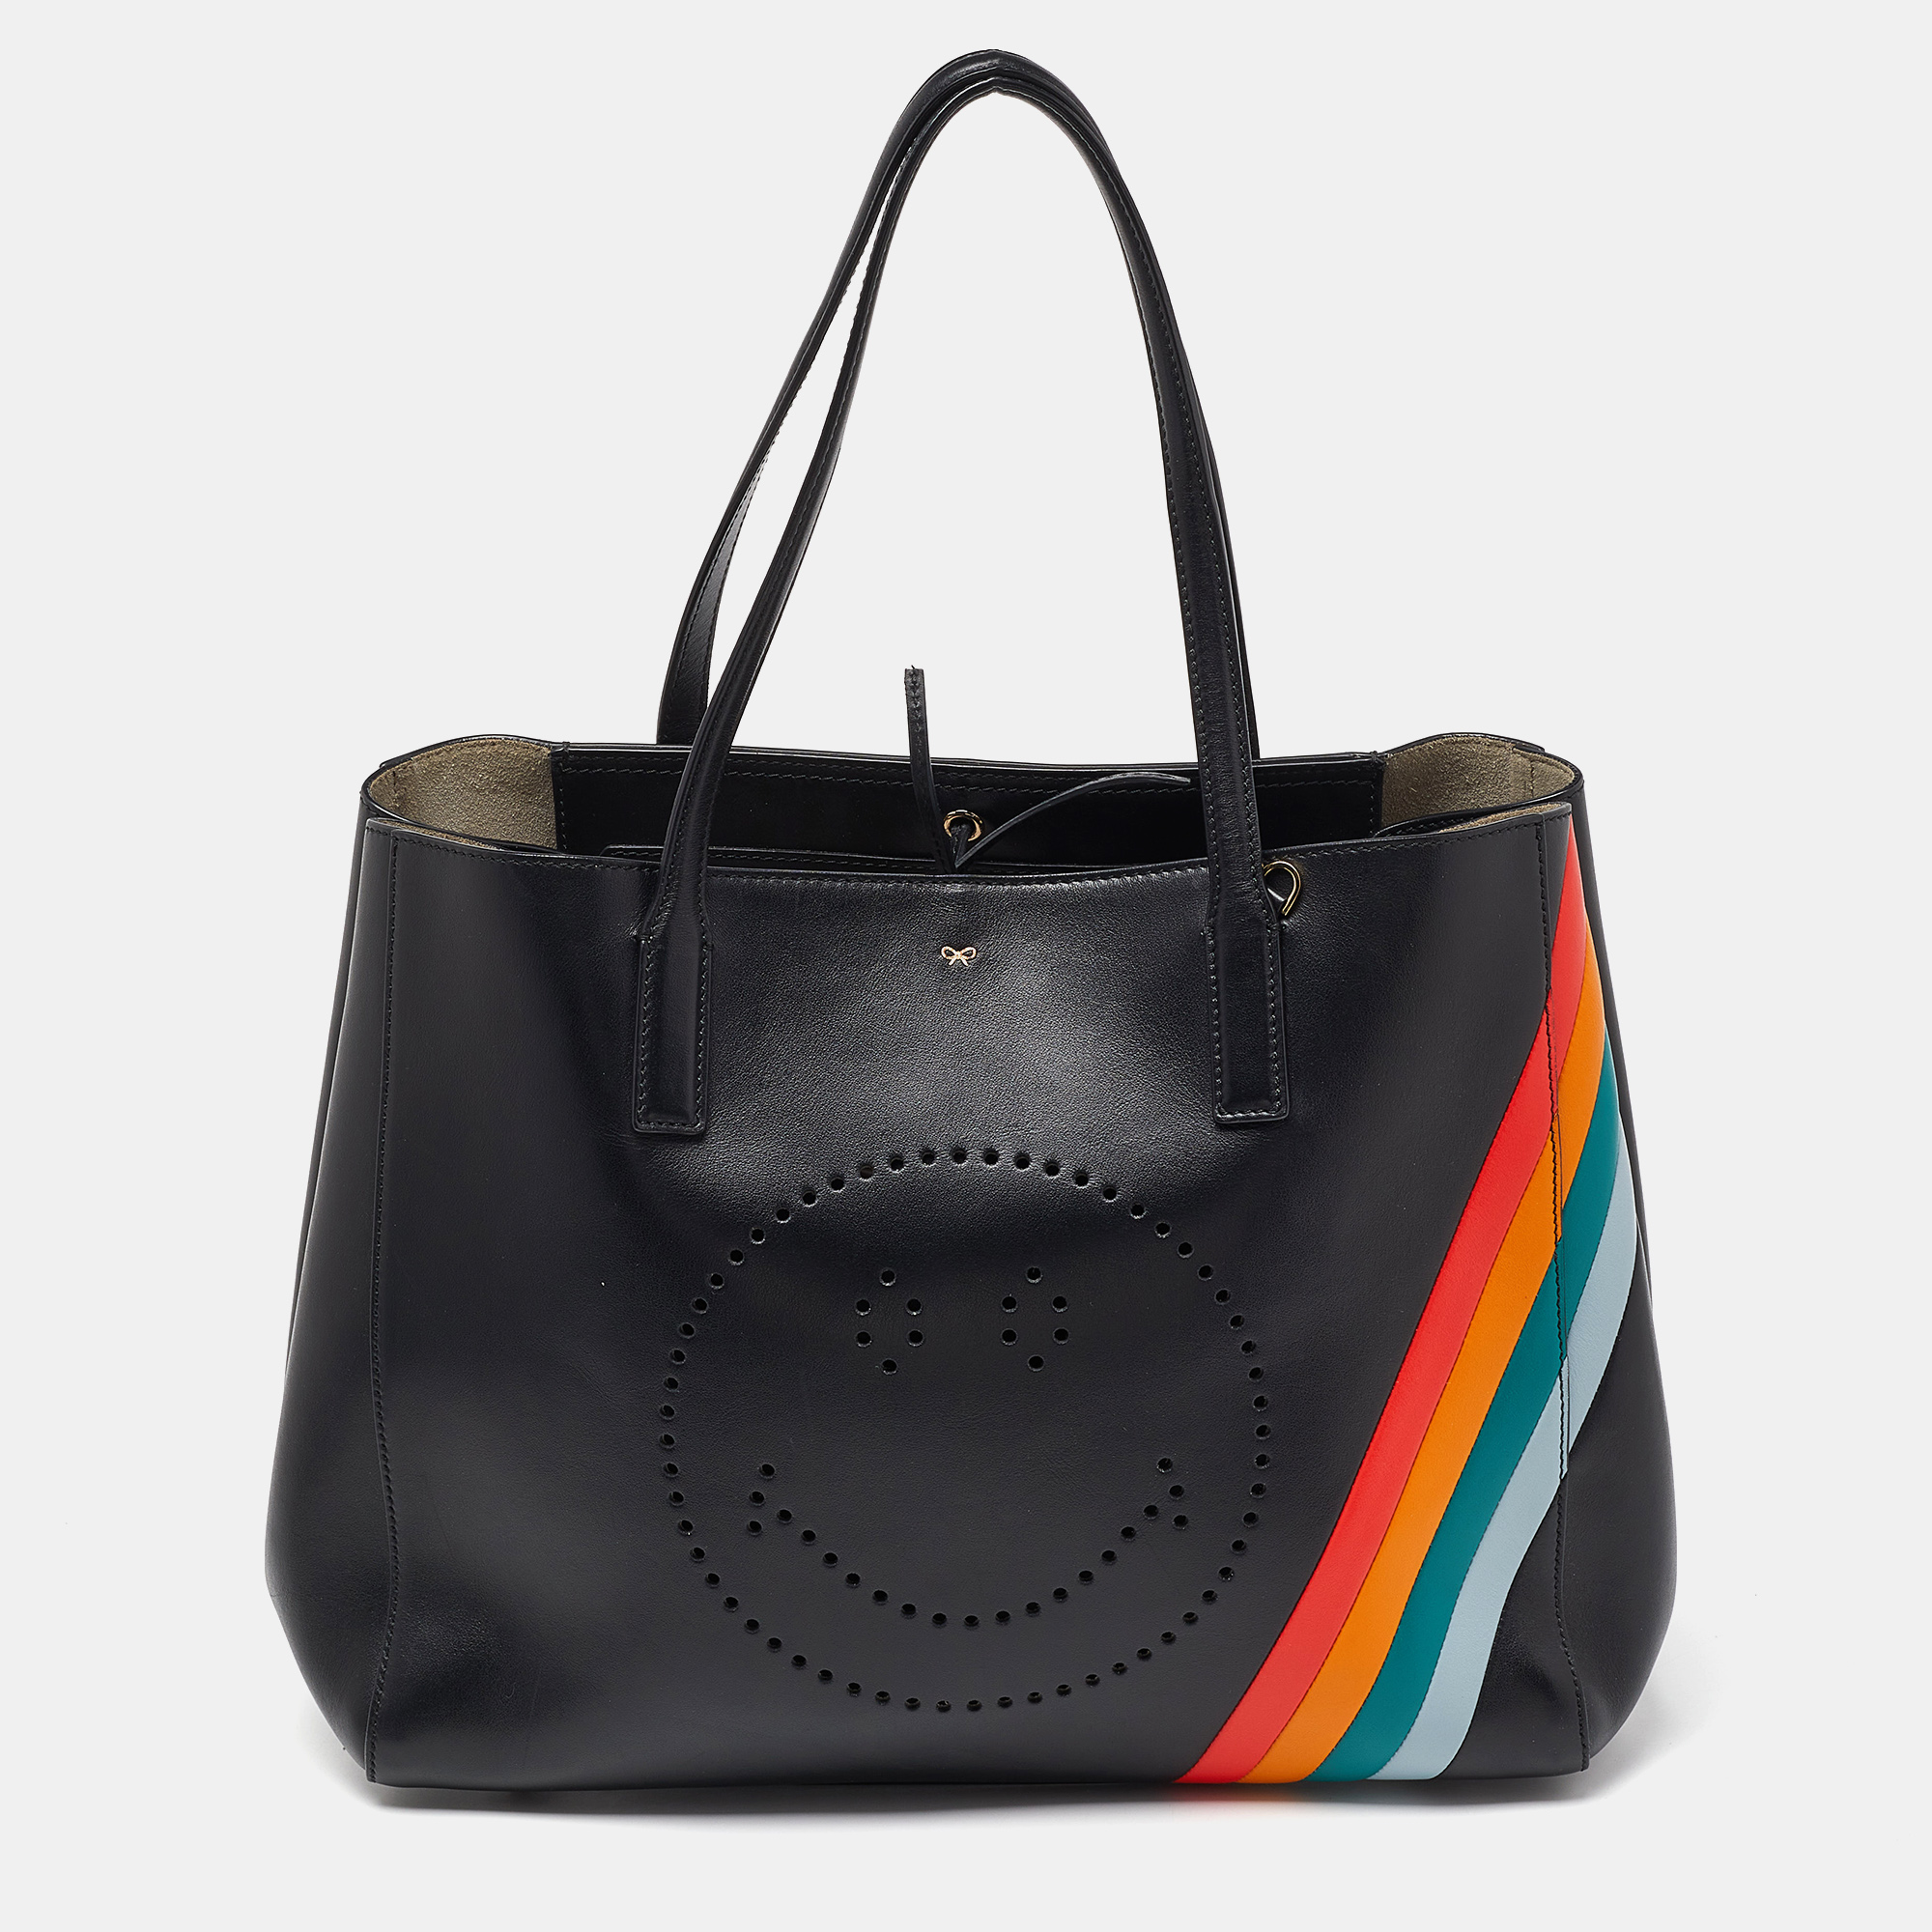 

Anya Hindmarch Black Leather Tote